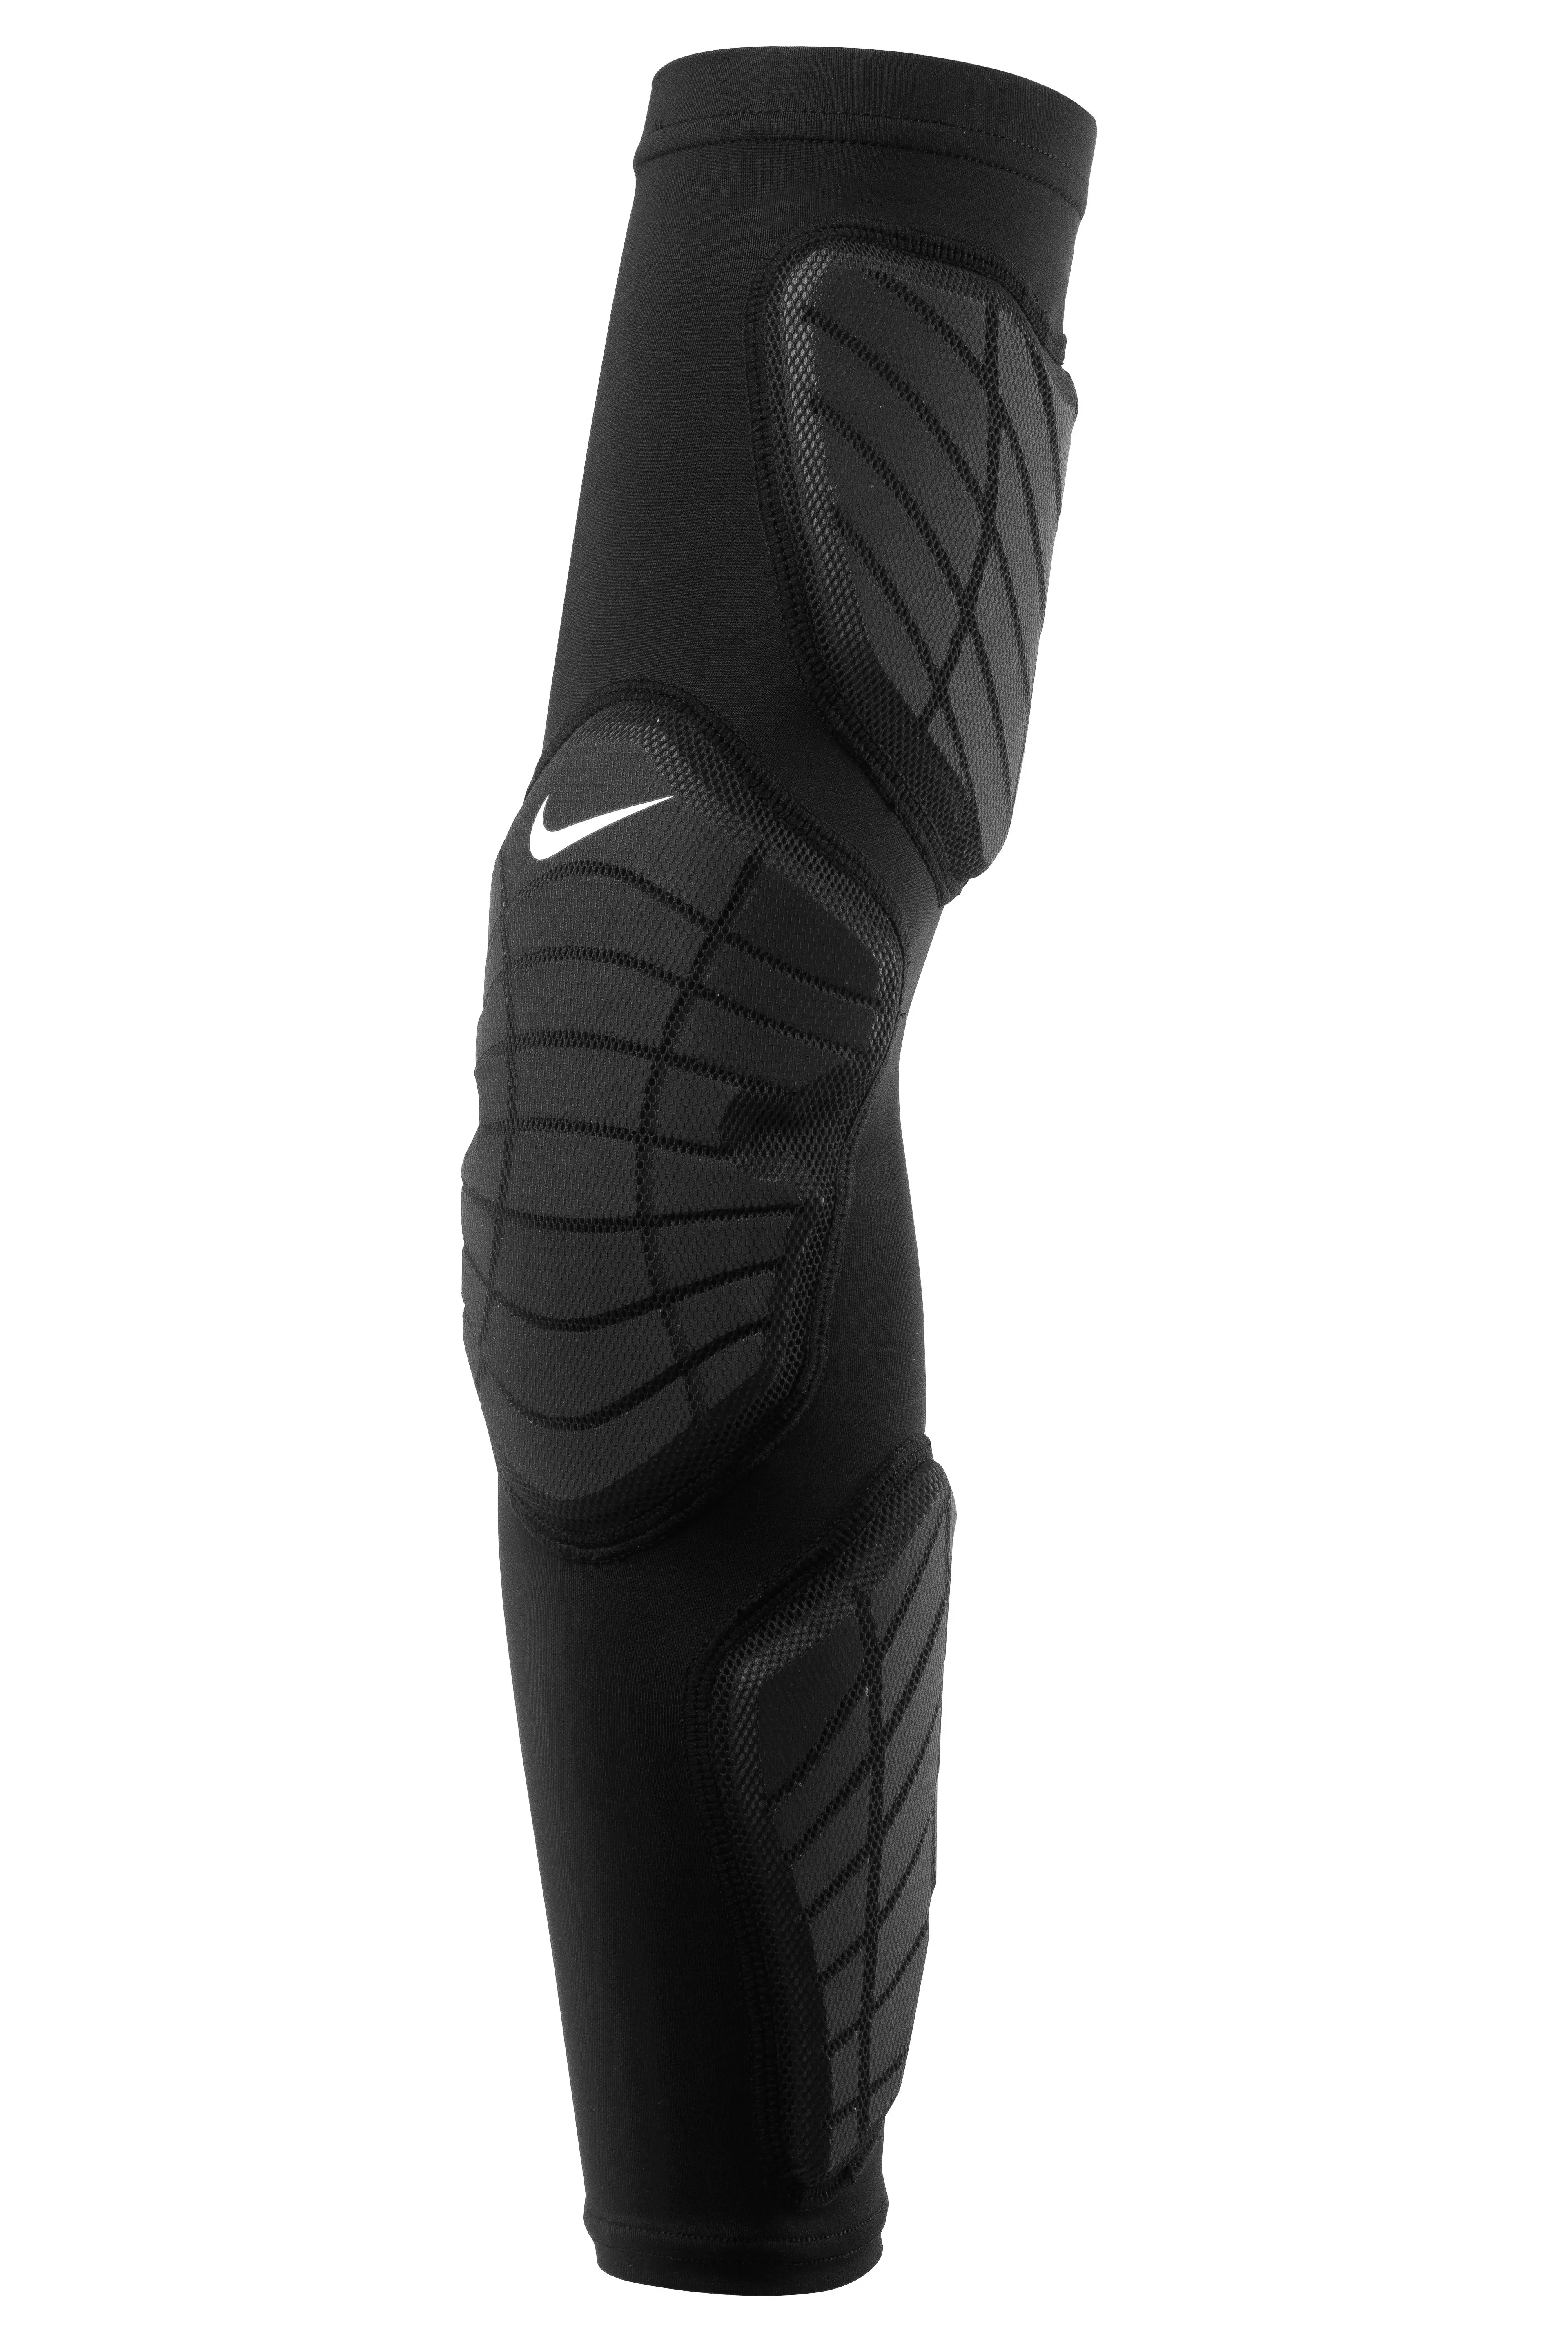 Nike Men's Pro Hyperstrong Compression Dri-FIT Football Padded